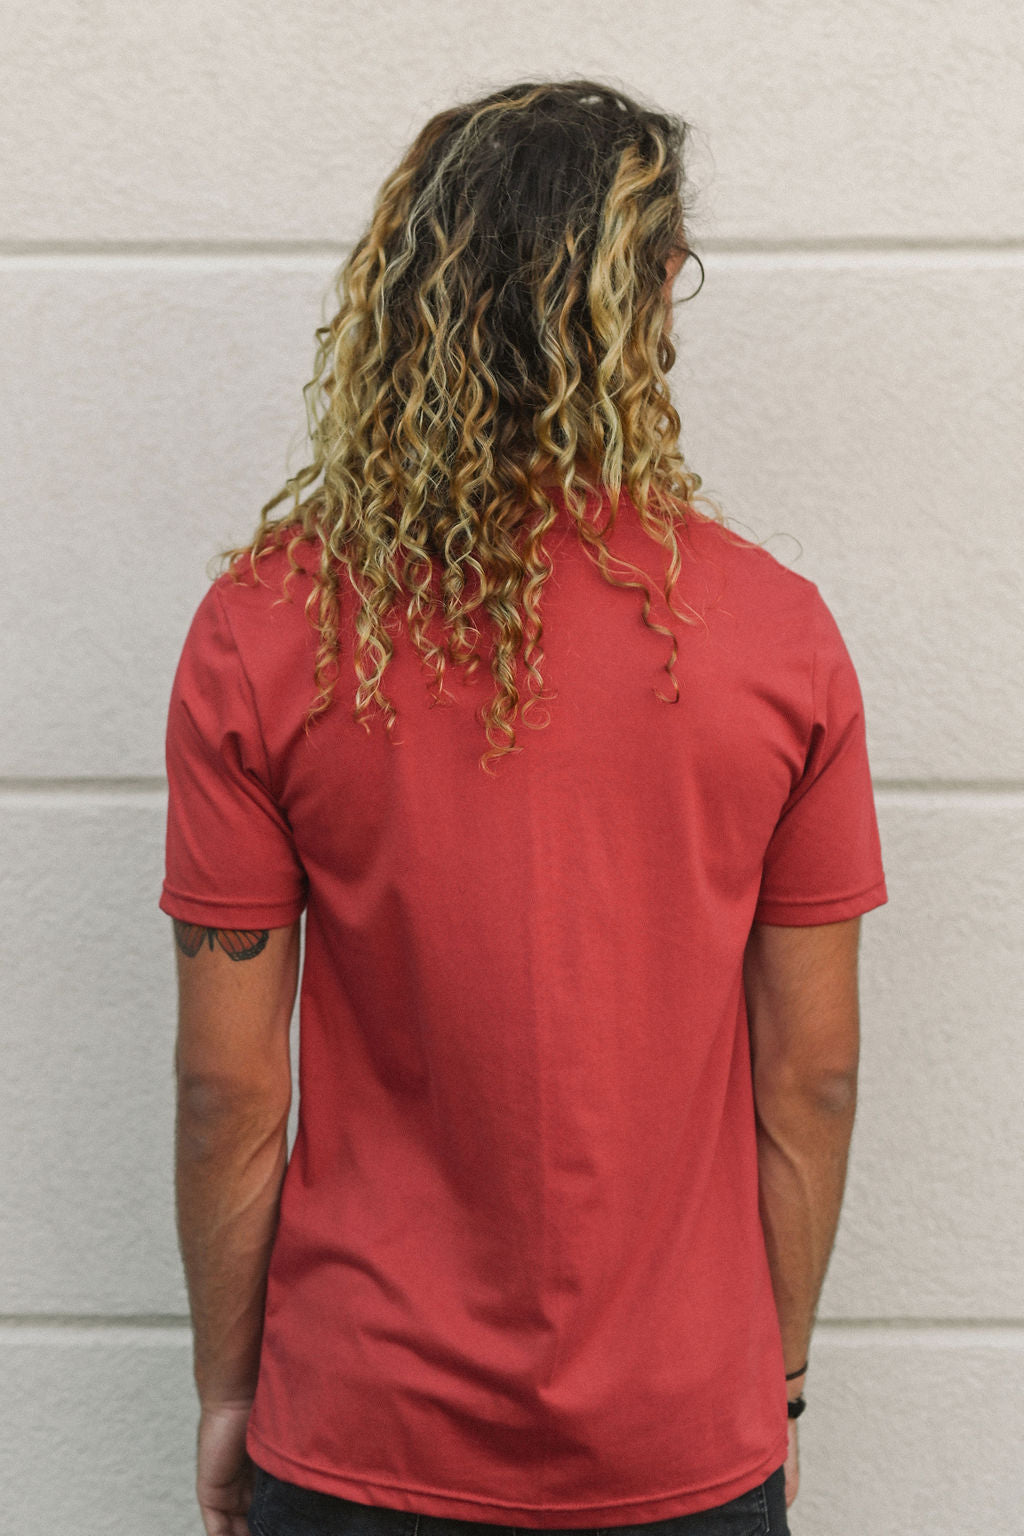 Unisex sustainably made red t-shirt with small white ungalli tree on front